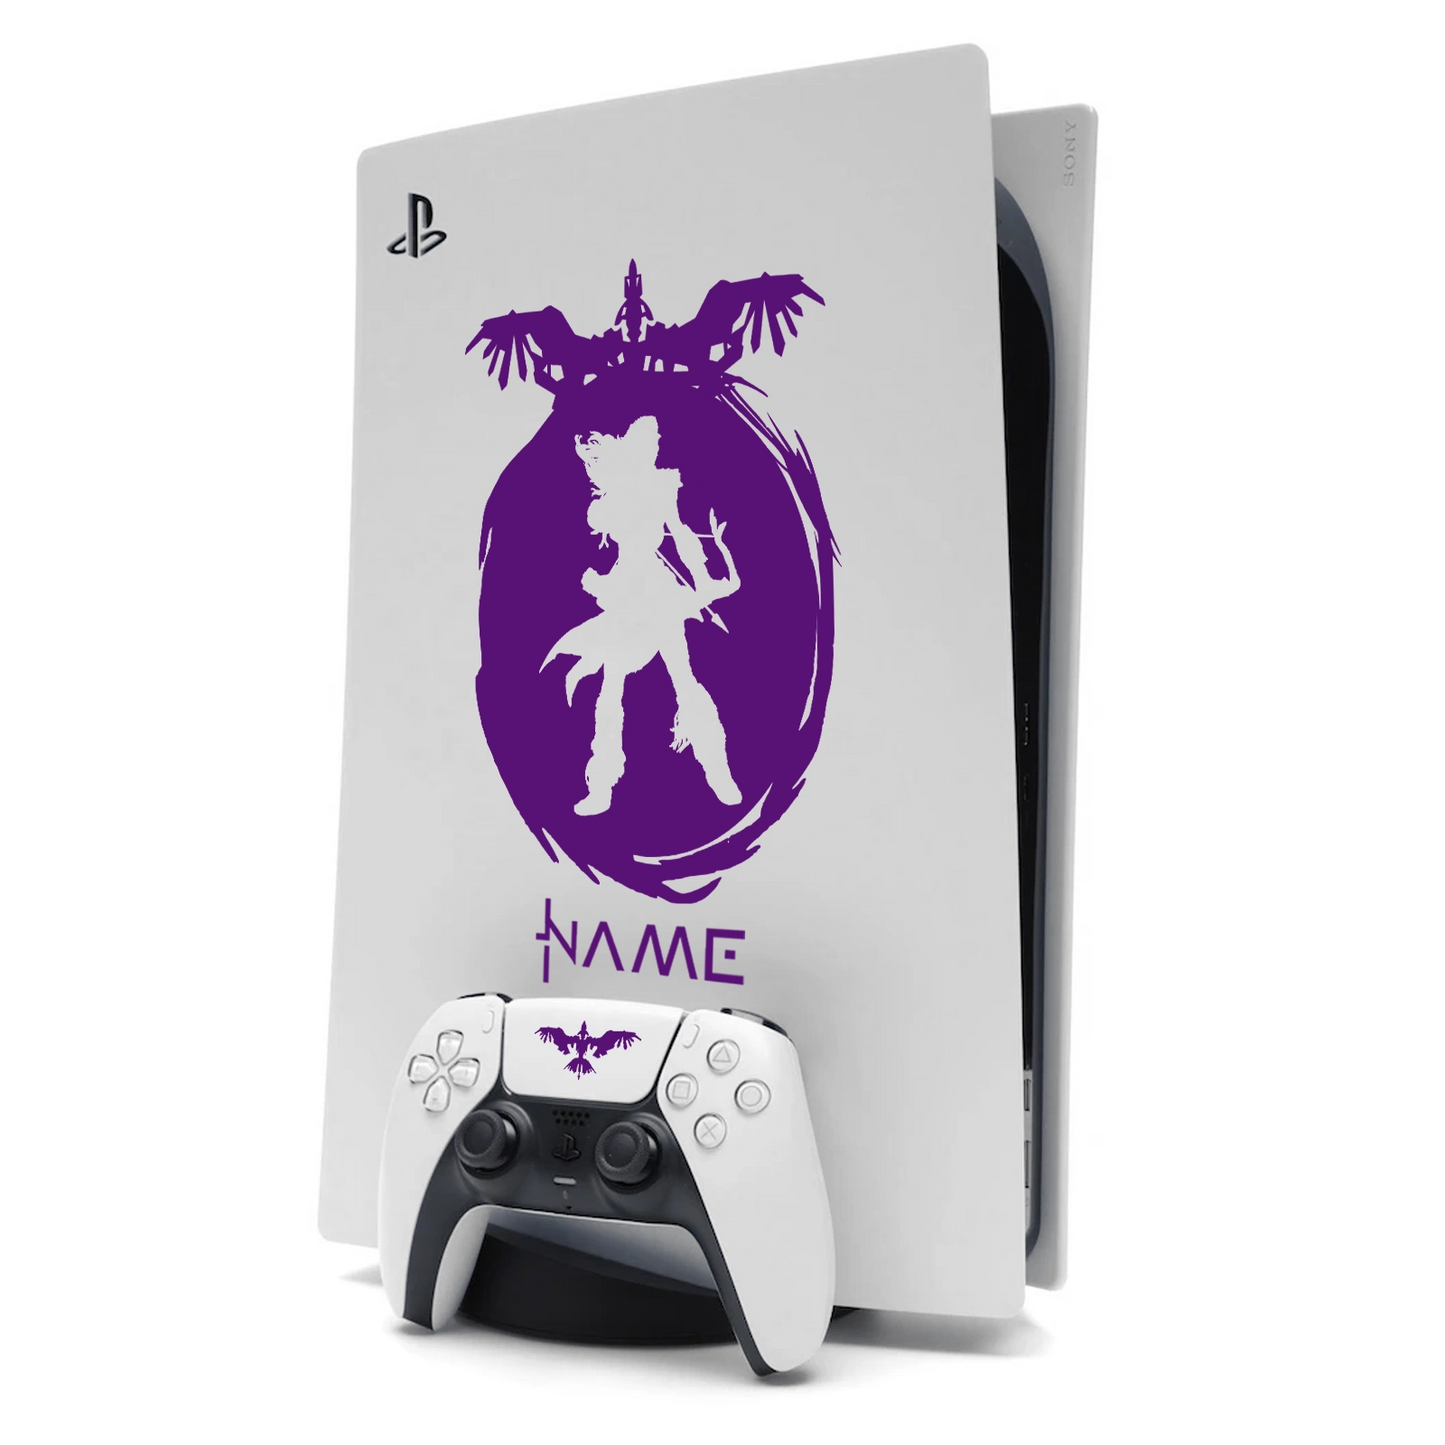 Horizon Aloy PS5 Sticker Skin for Playstation 5 in Purple